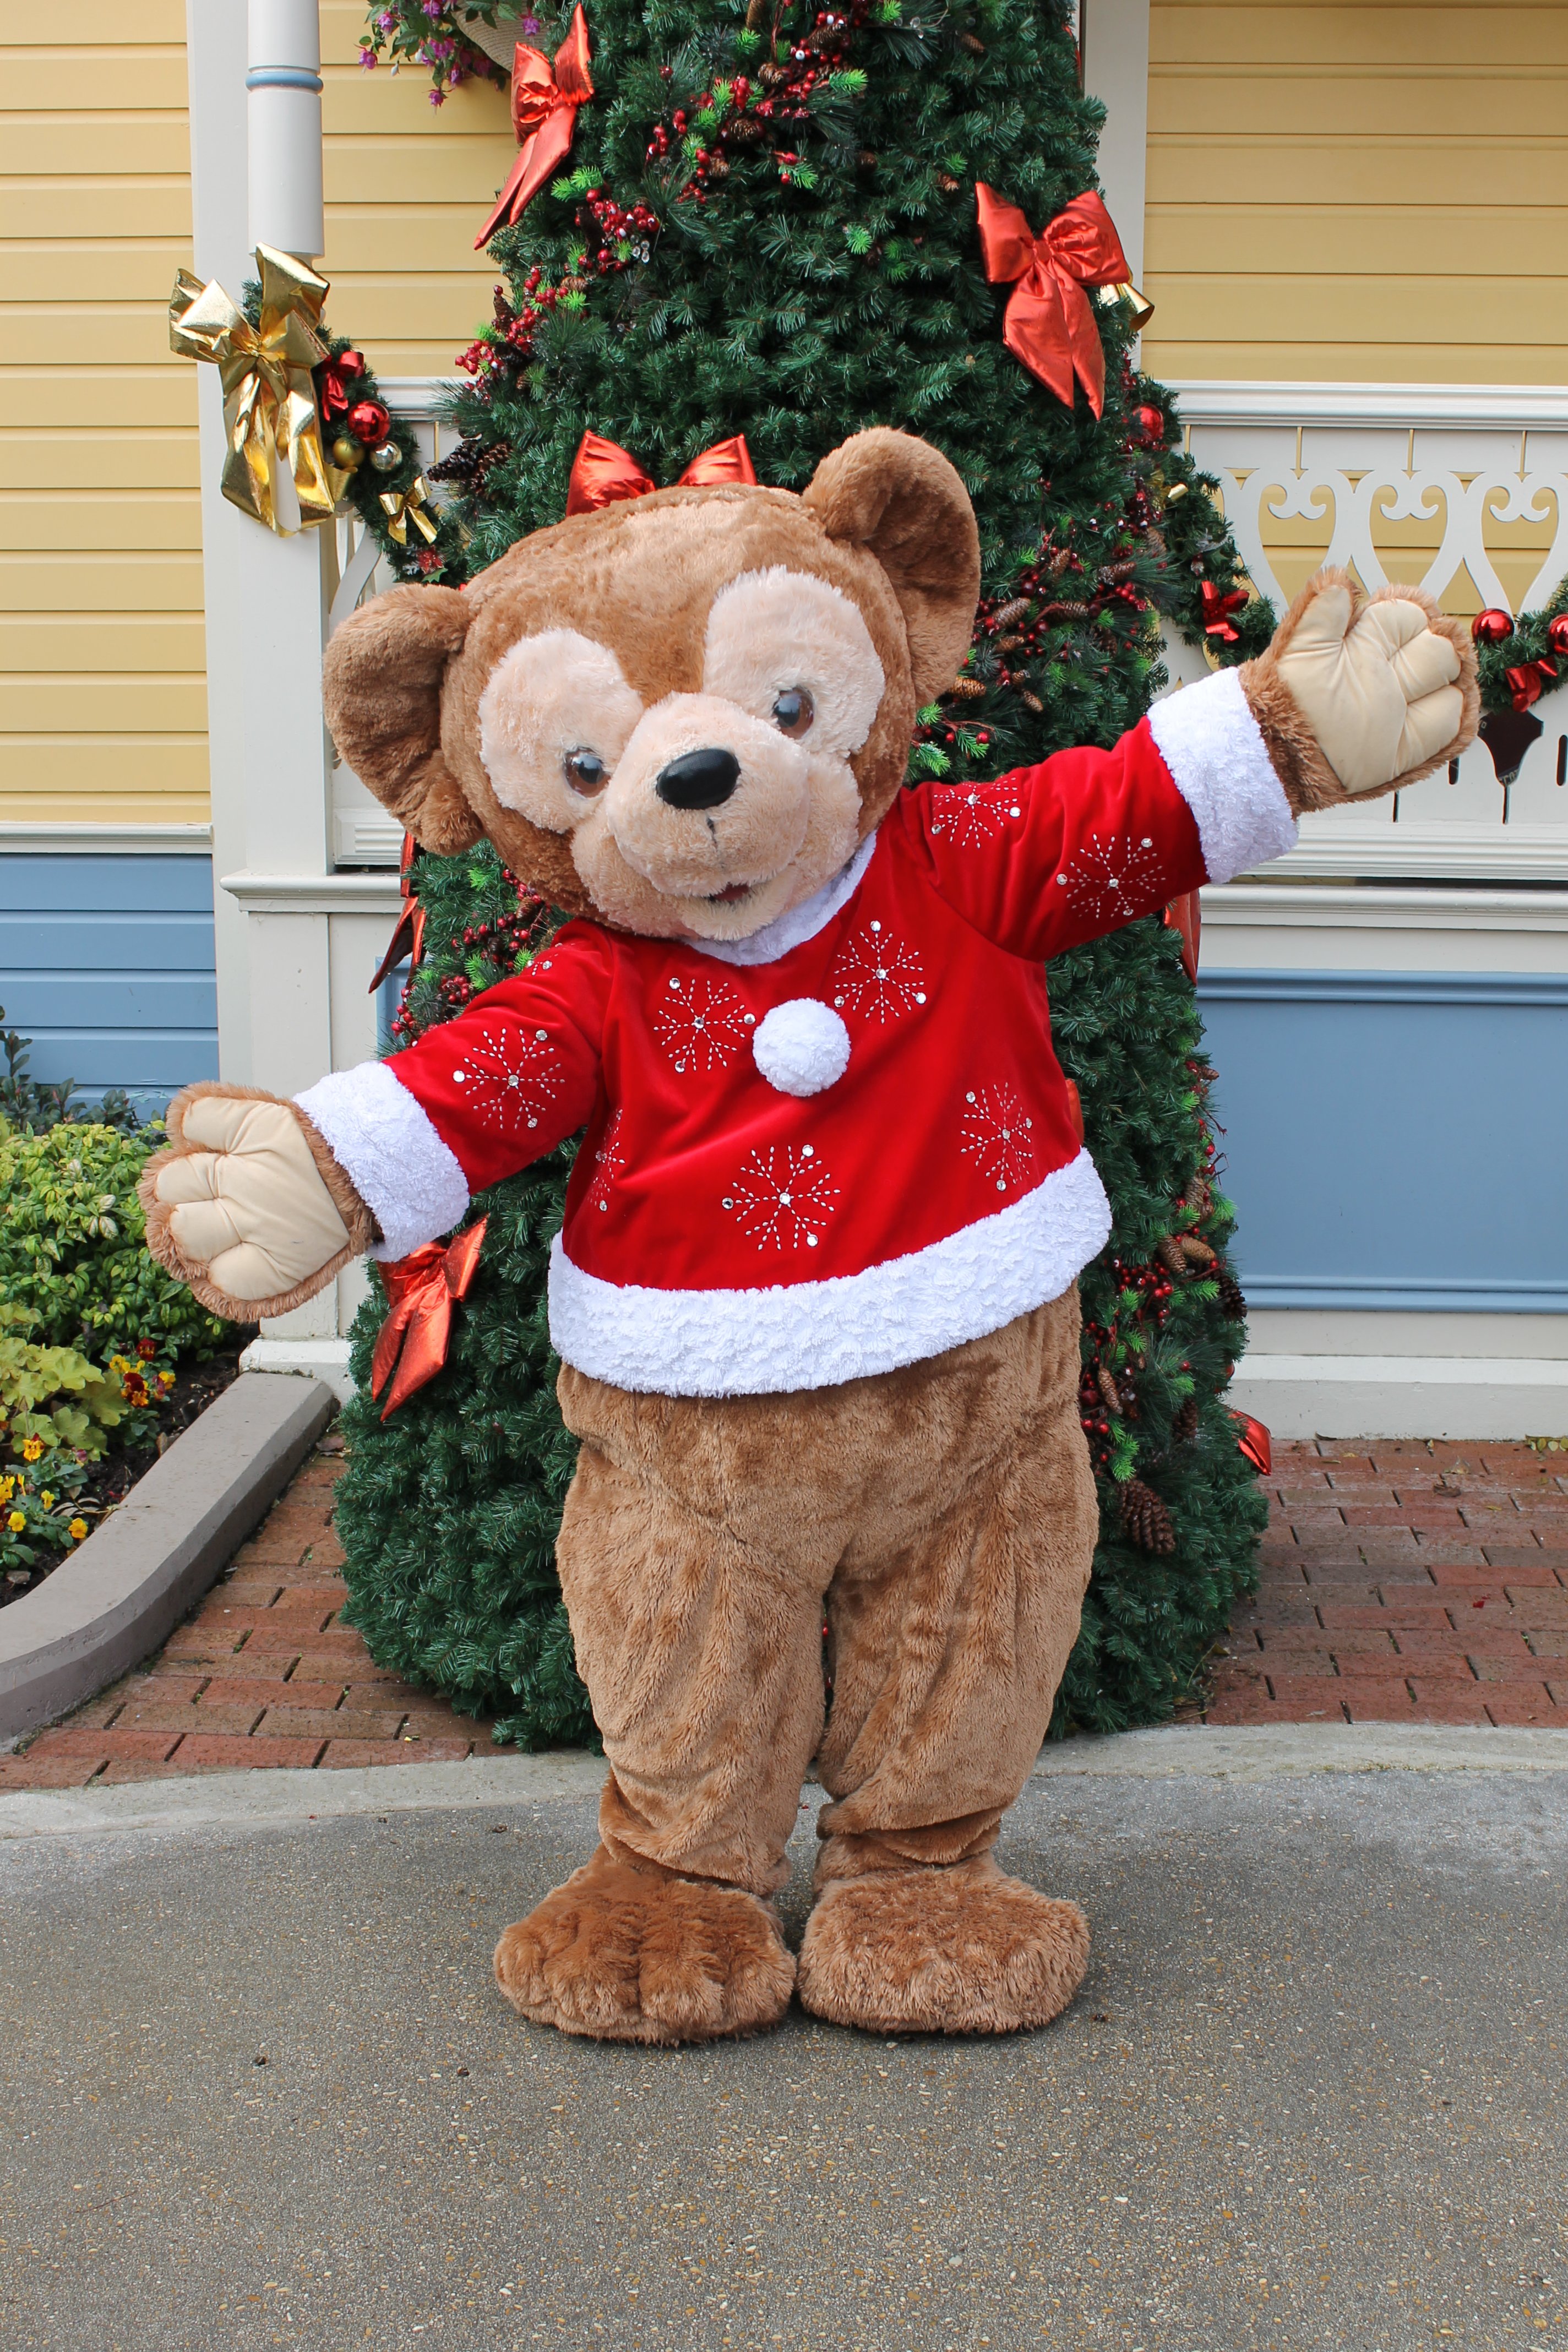 During the Christmas Season Duffy can be found on Main Street USA wearing his Christmas outfit. This was the version in 2012.